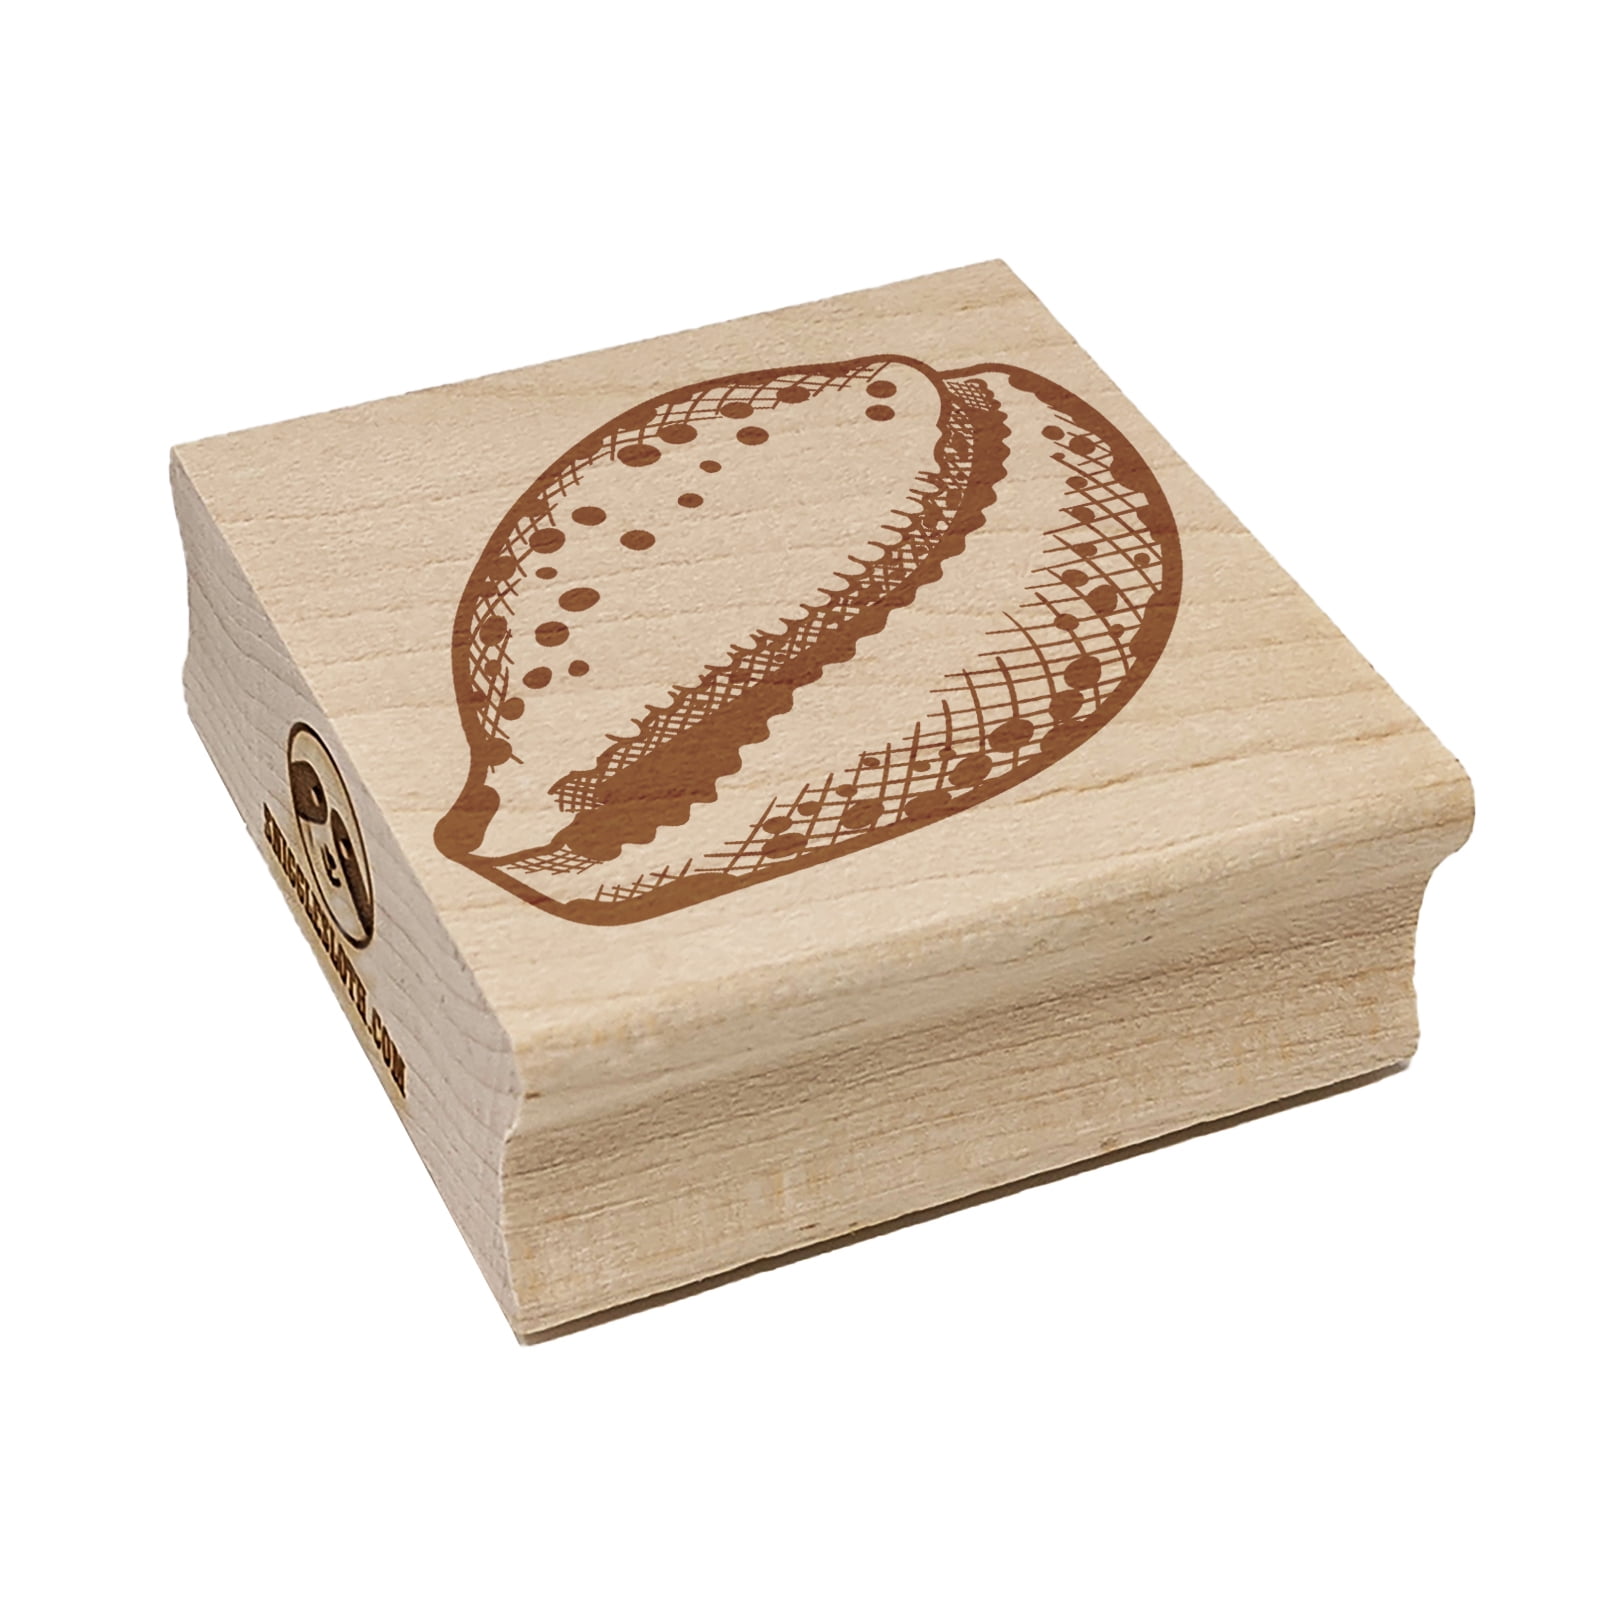 Cyprae Tigris Cowrie Hashmark Shaded Shell Beach Seashell Square Rubber Stamp Stamping Scrapbooking Crafting - Small 1.25in